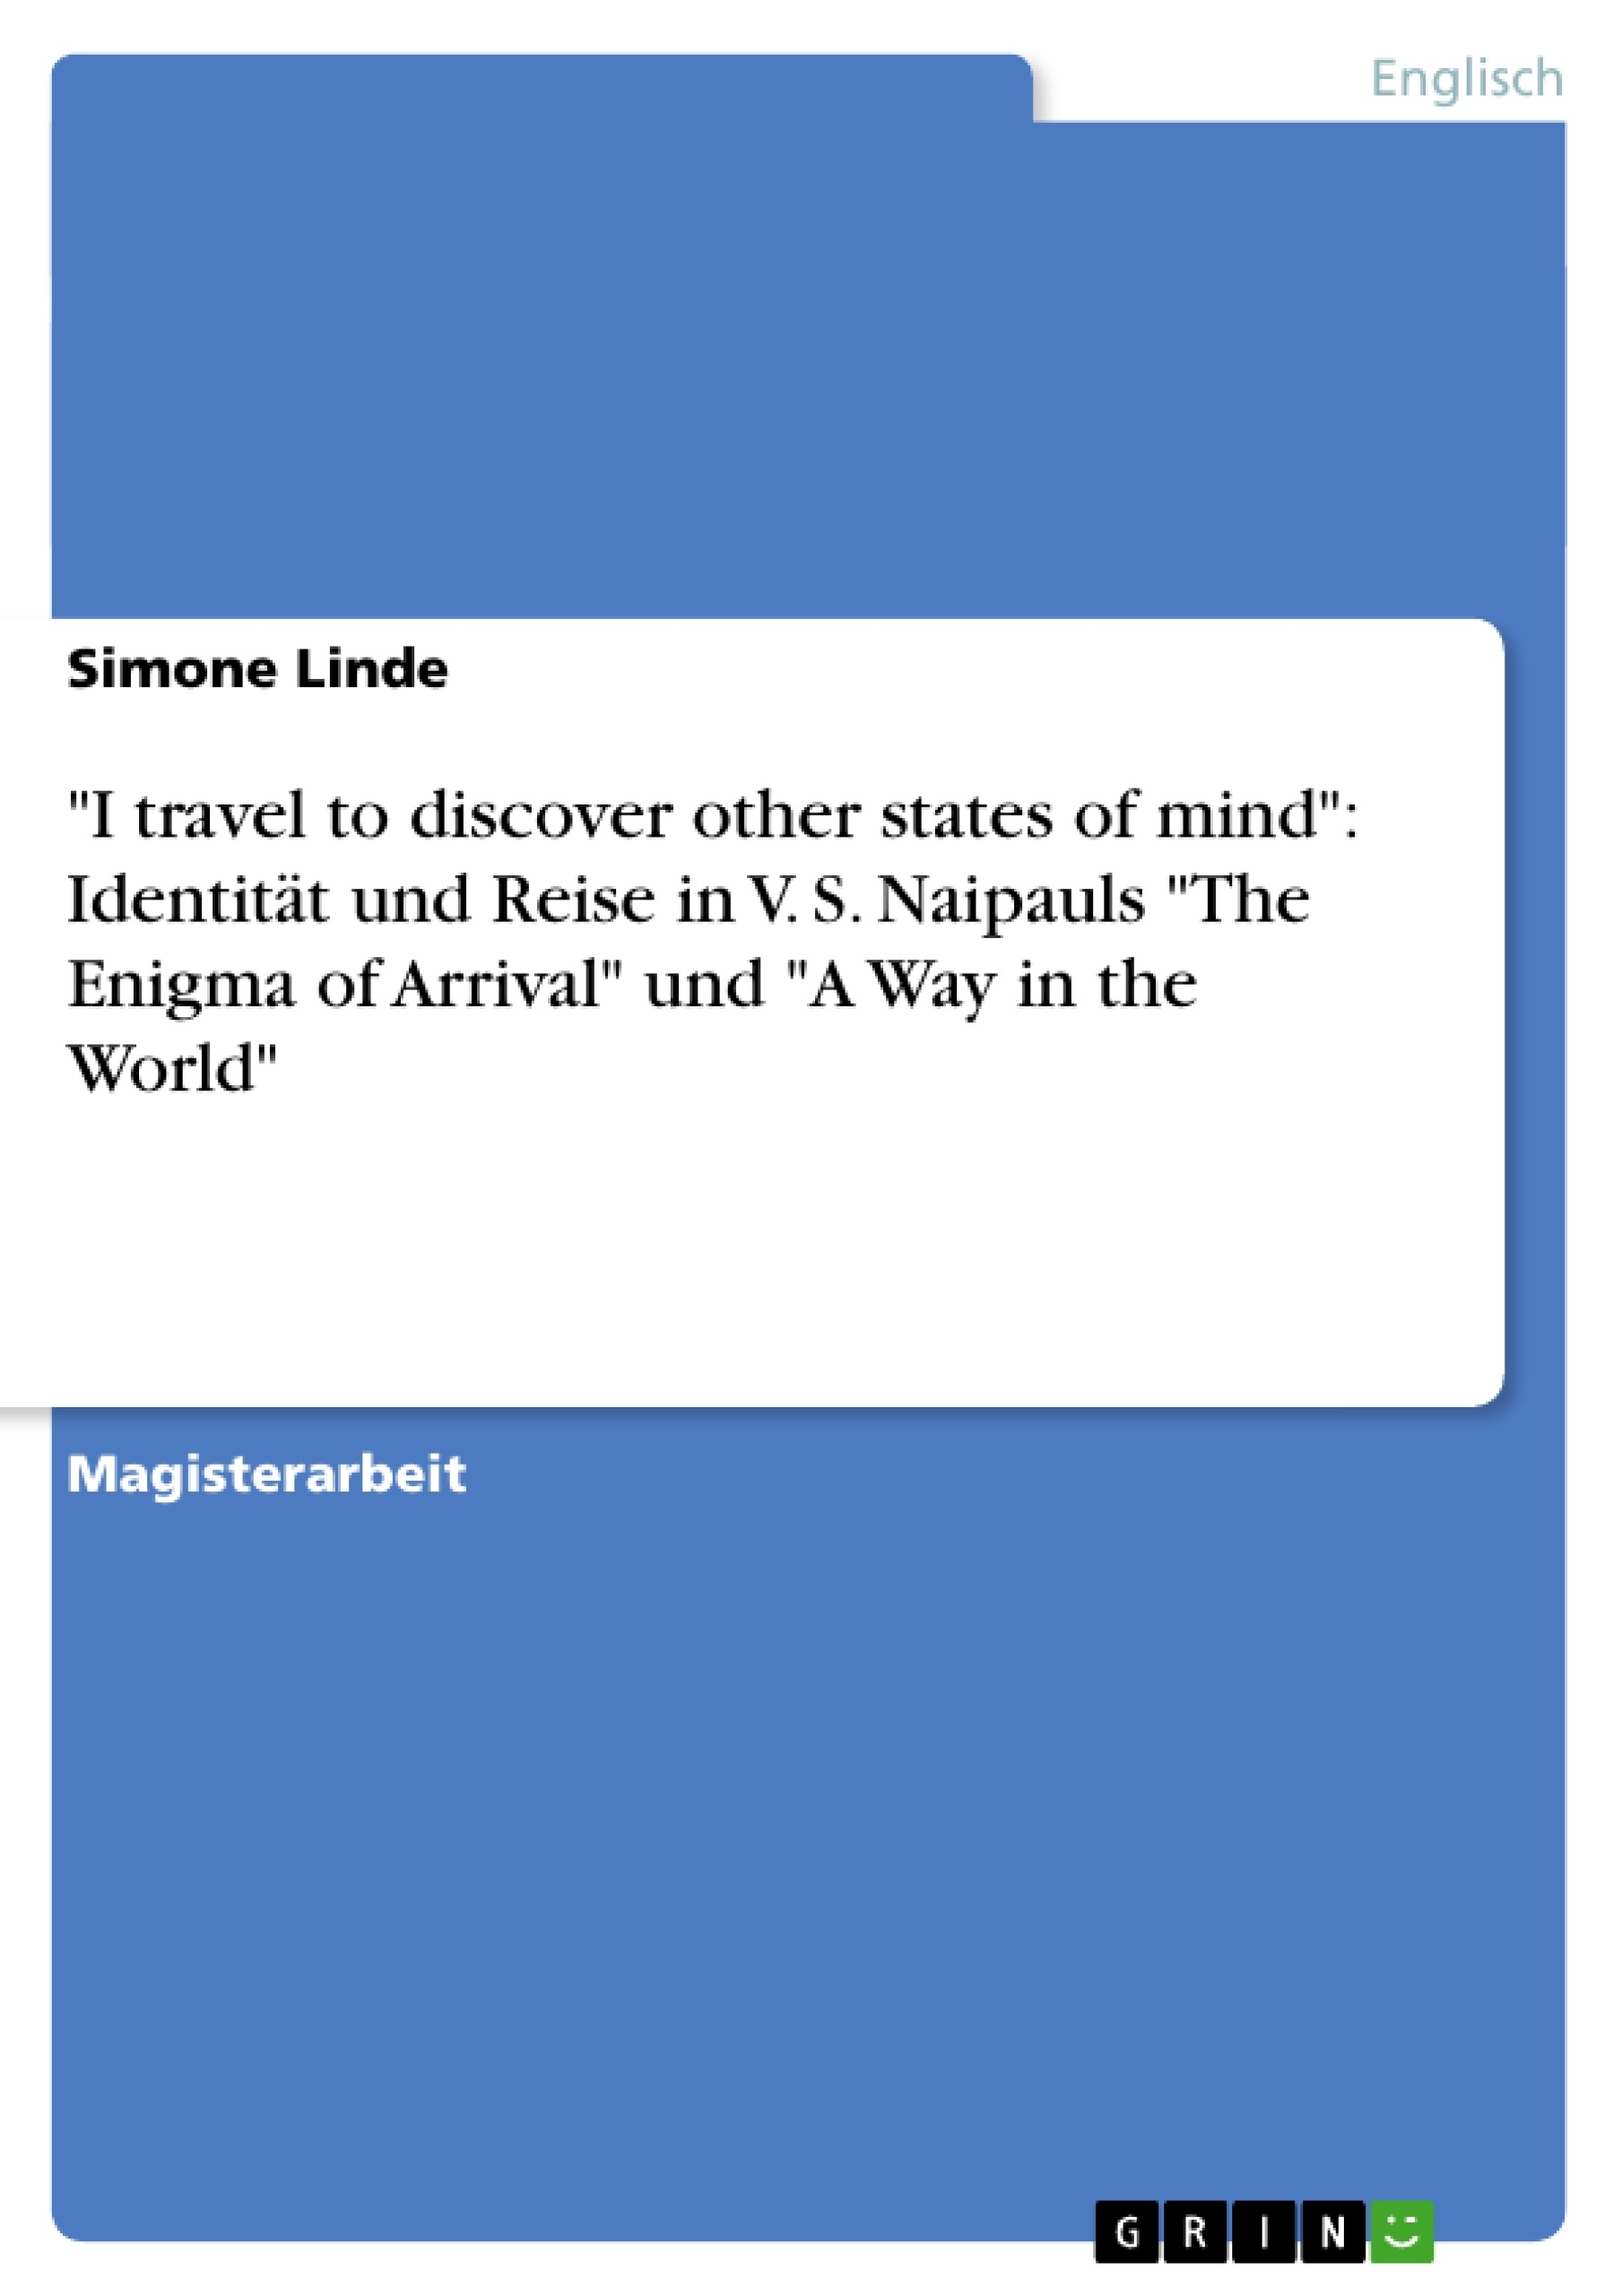 Titre: "I travel to discover other states of mind": Identität und Reise in V. S. Naipauls "The Enigma of Arrival" und "A Way in the World"